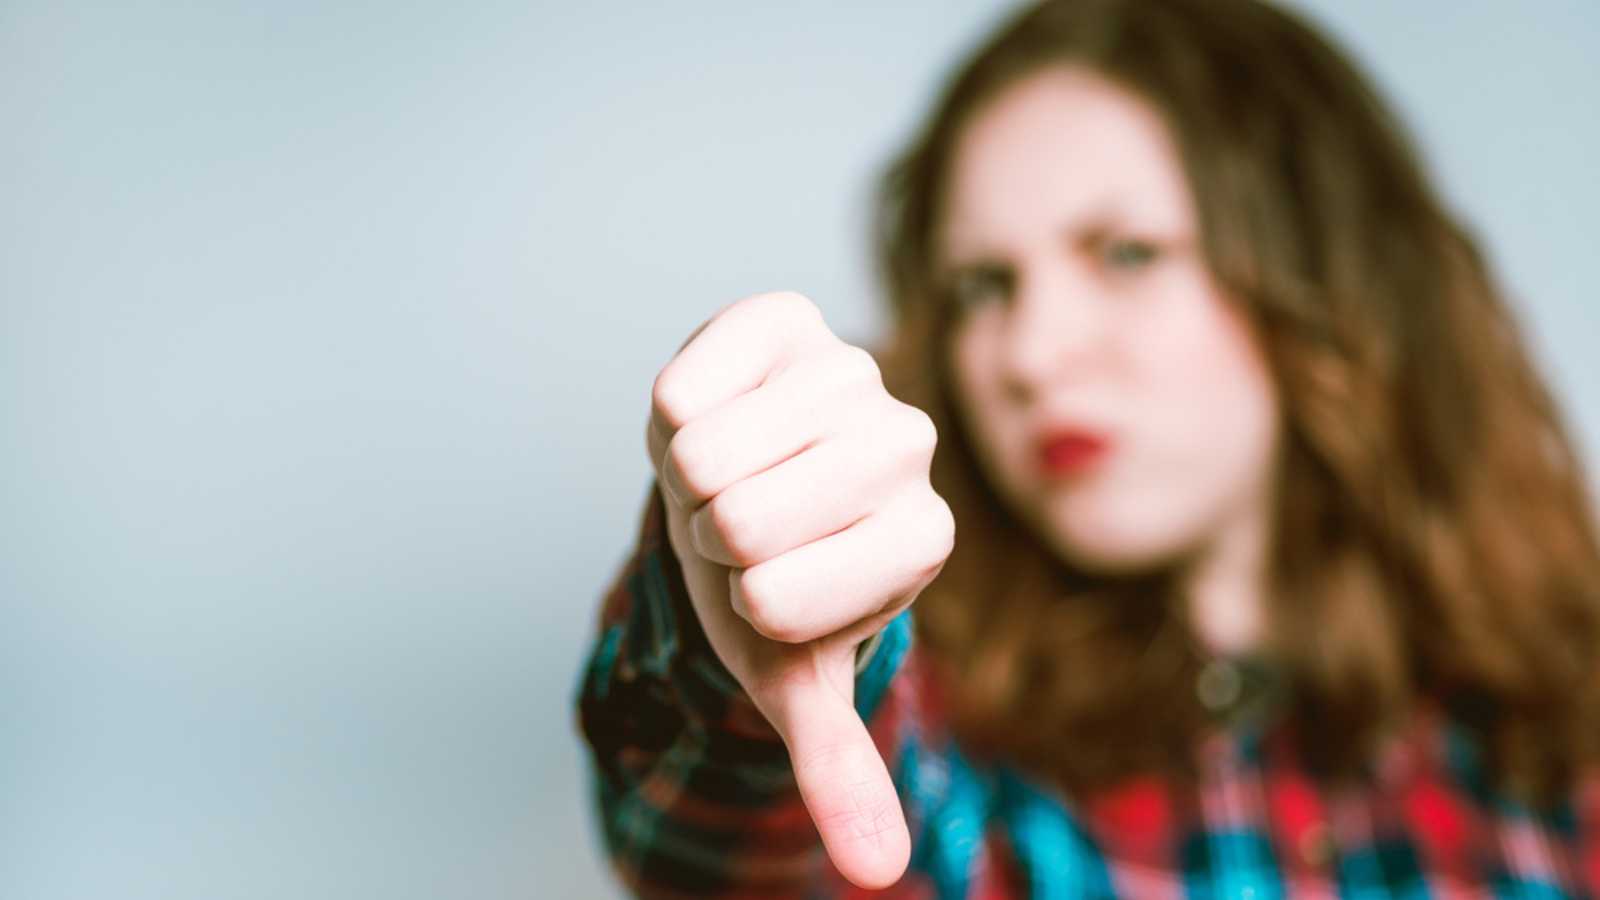 Woman Showing Thumbs Down Hating Someone